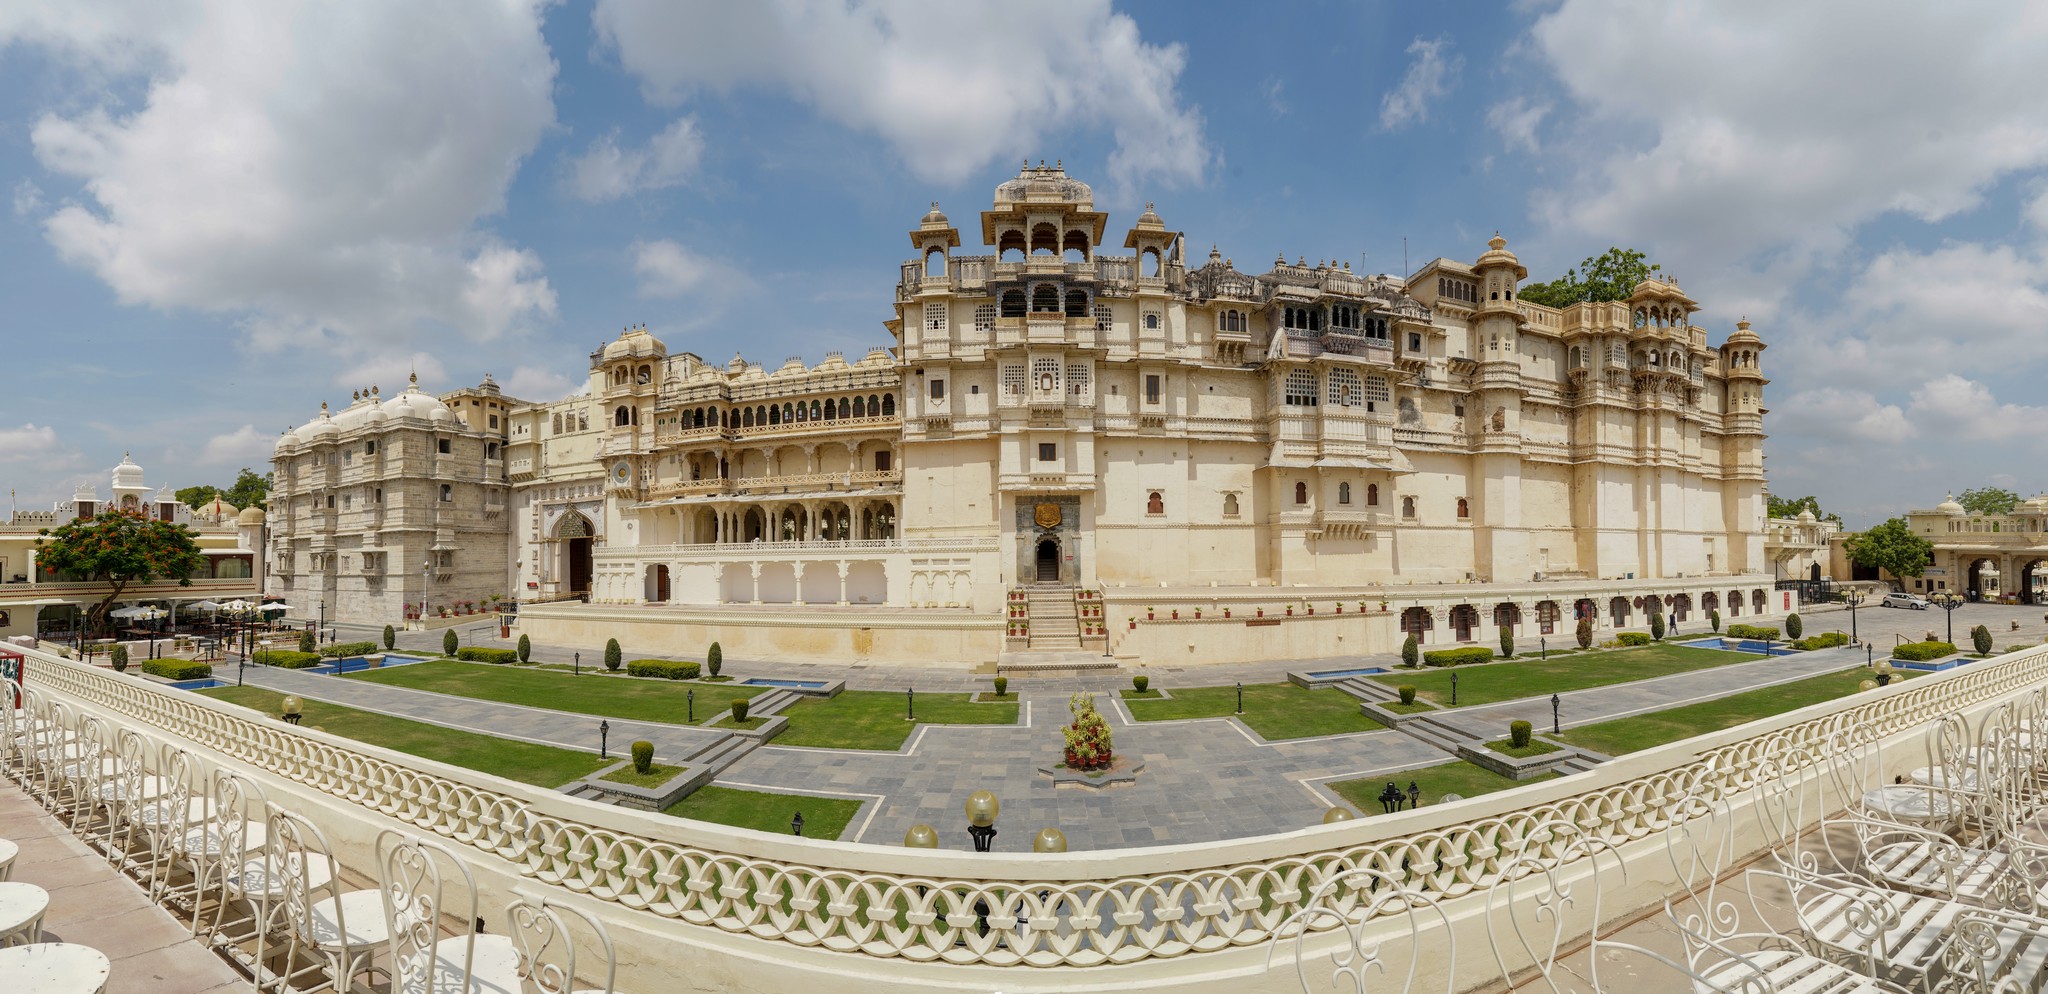 The City Palace Museum, Udaipur view from Manek Chowk